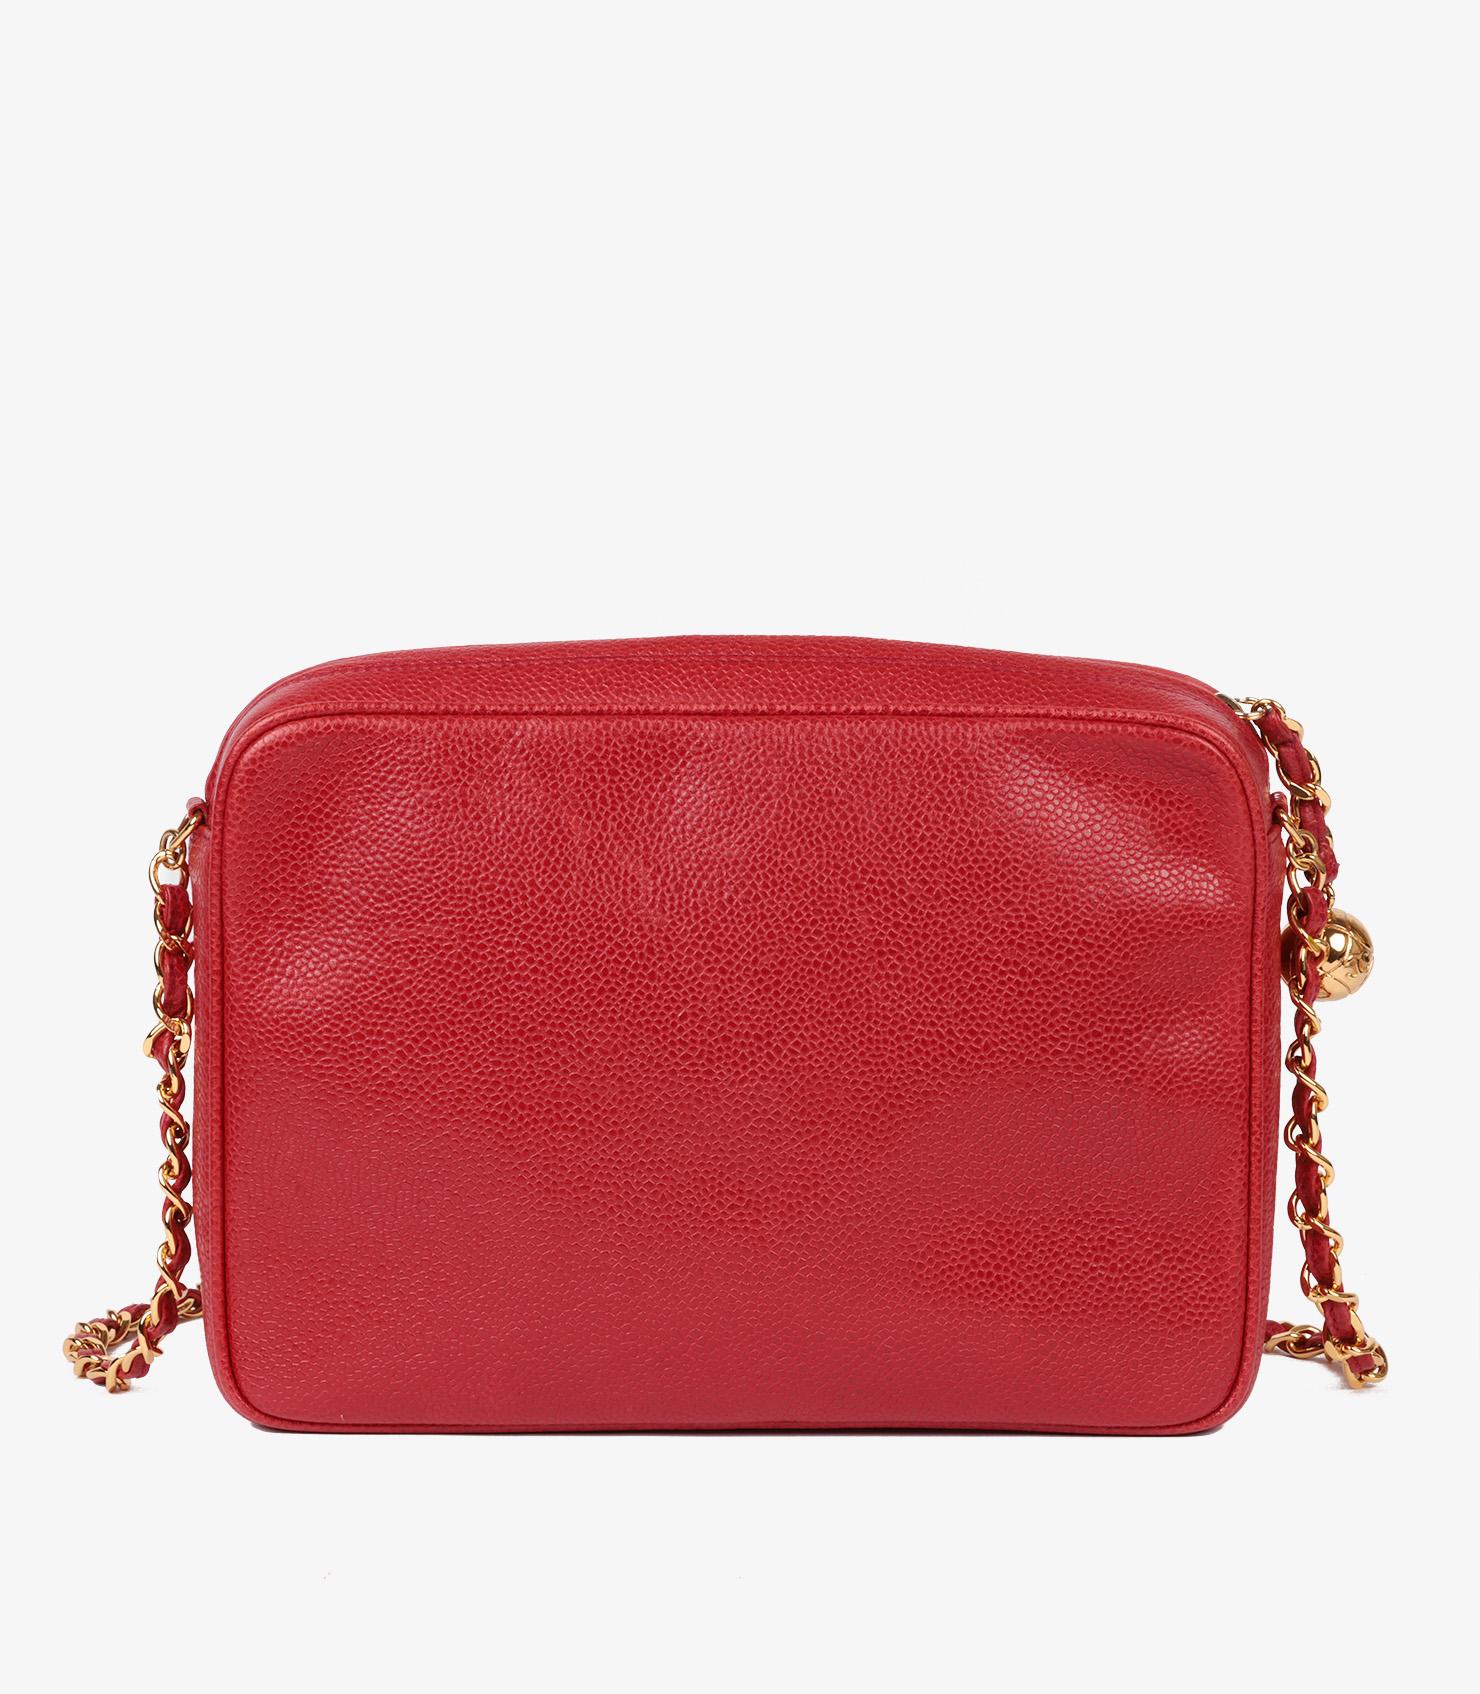 Chanel Red Caviar Leather Vintage Timeless Camera Bag For Sale 2